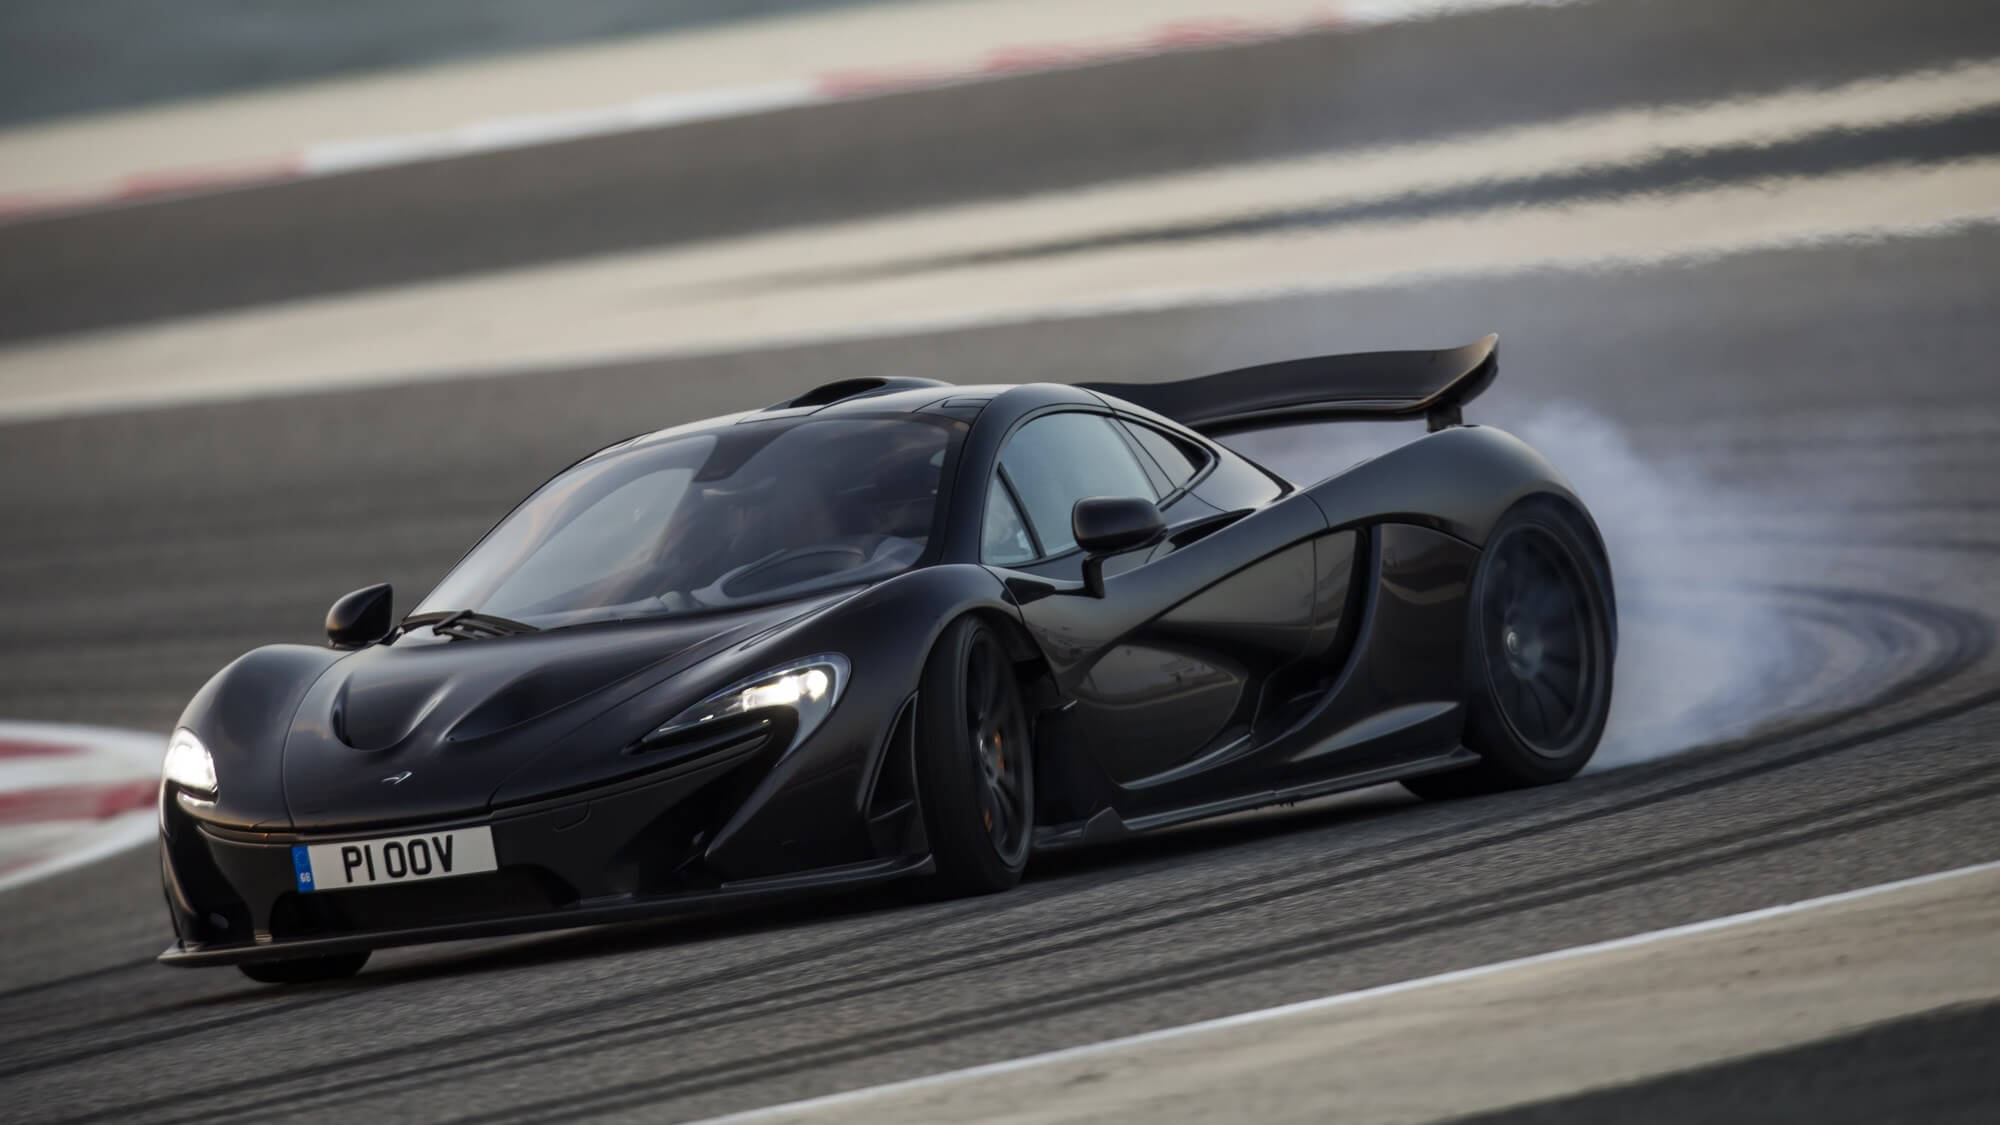 McLaren P1 | The Best Driver’s Car in The World